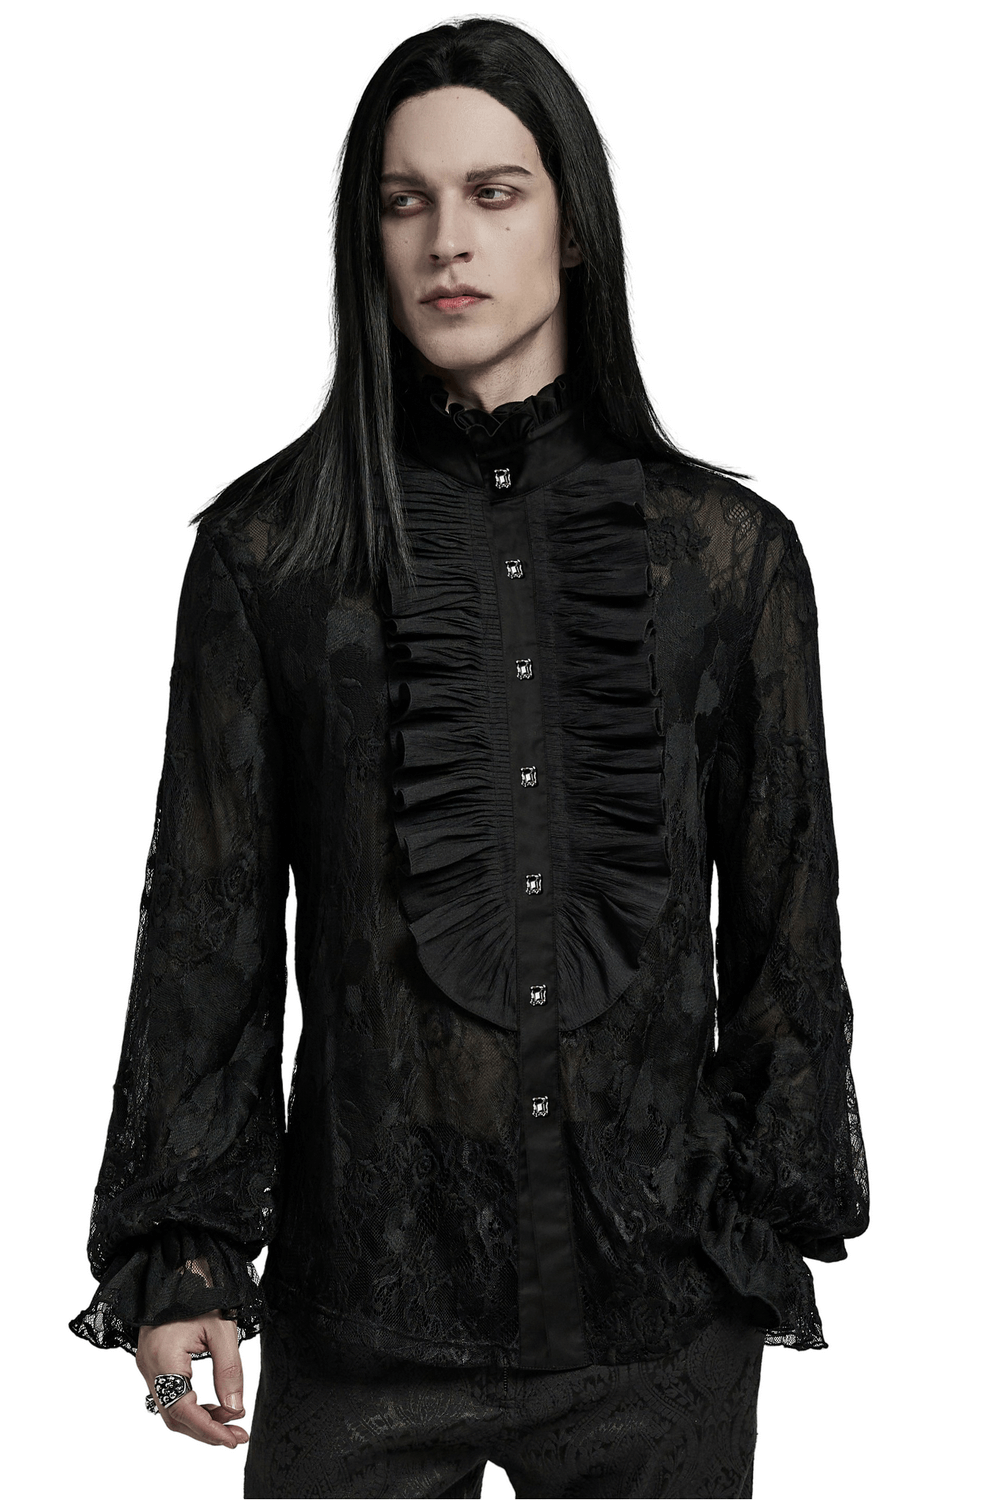 Black Lace Embroidered Gothic Shirt with Ruffled Collar